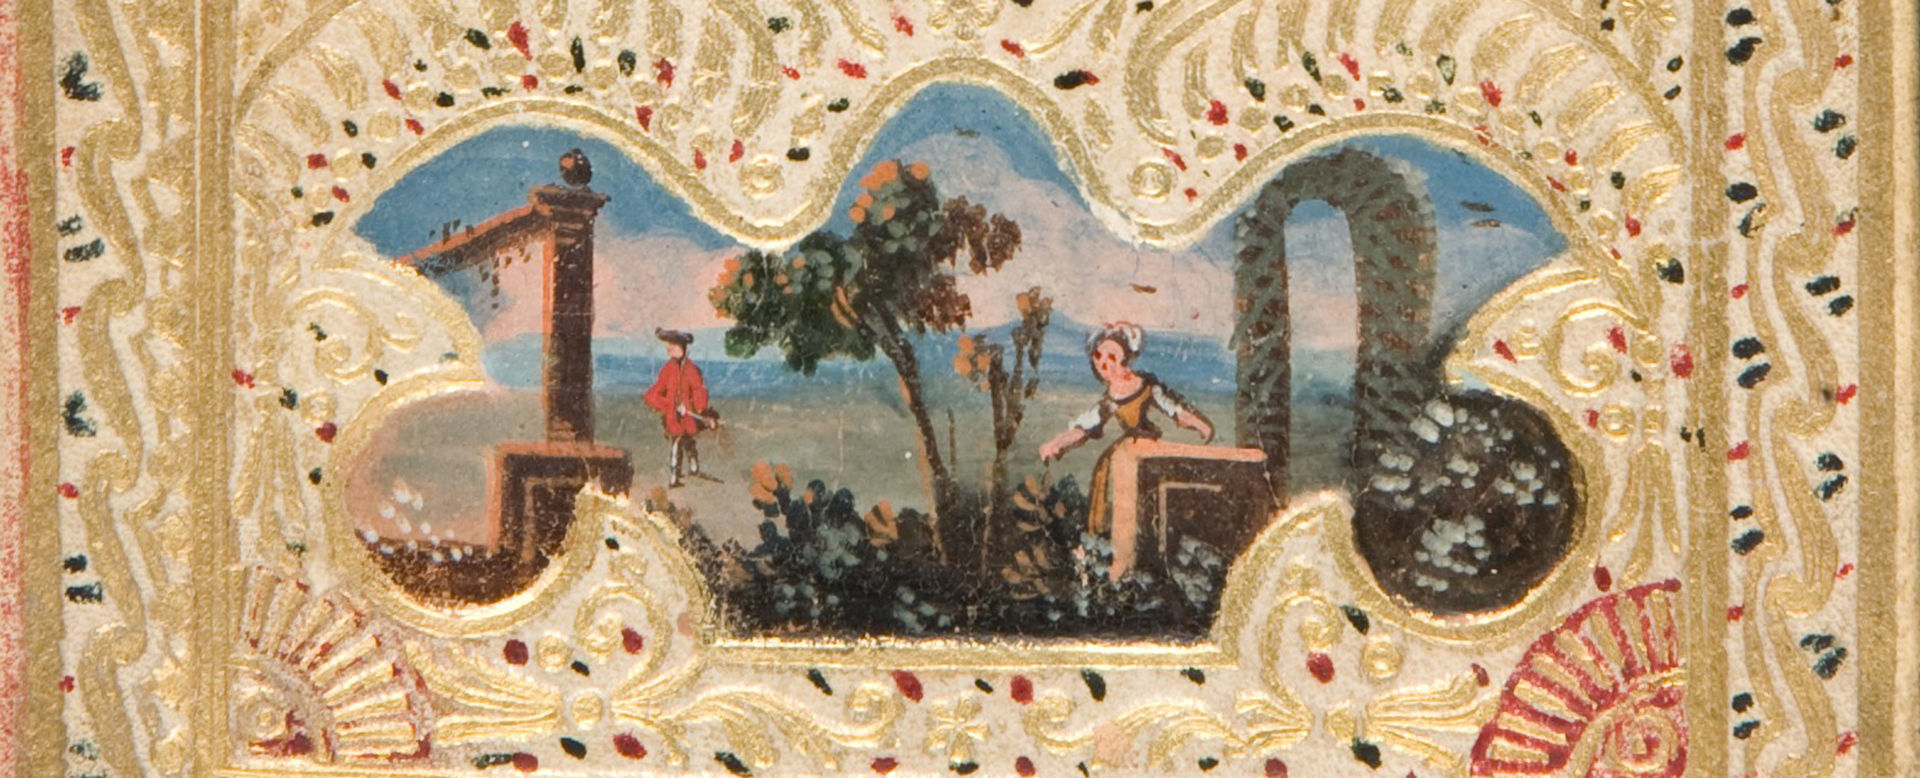 Detail of a painted inset from a 1772 white leather and gold-tooled book binding, depicting a woman in a long brown dress in a flowering garden, and a man wearing a red coat in the distant landscape.